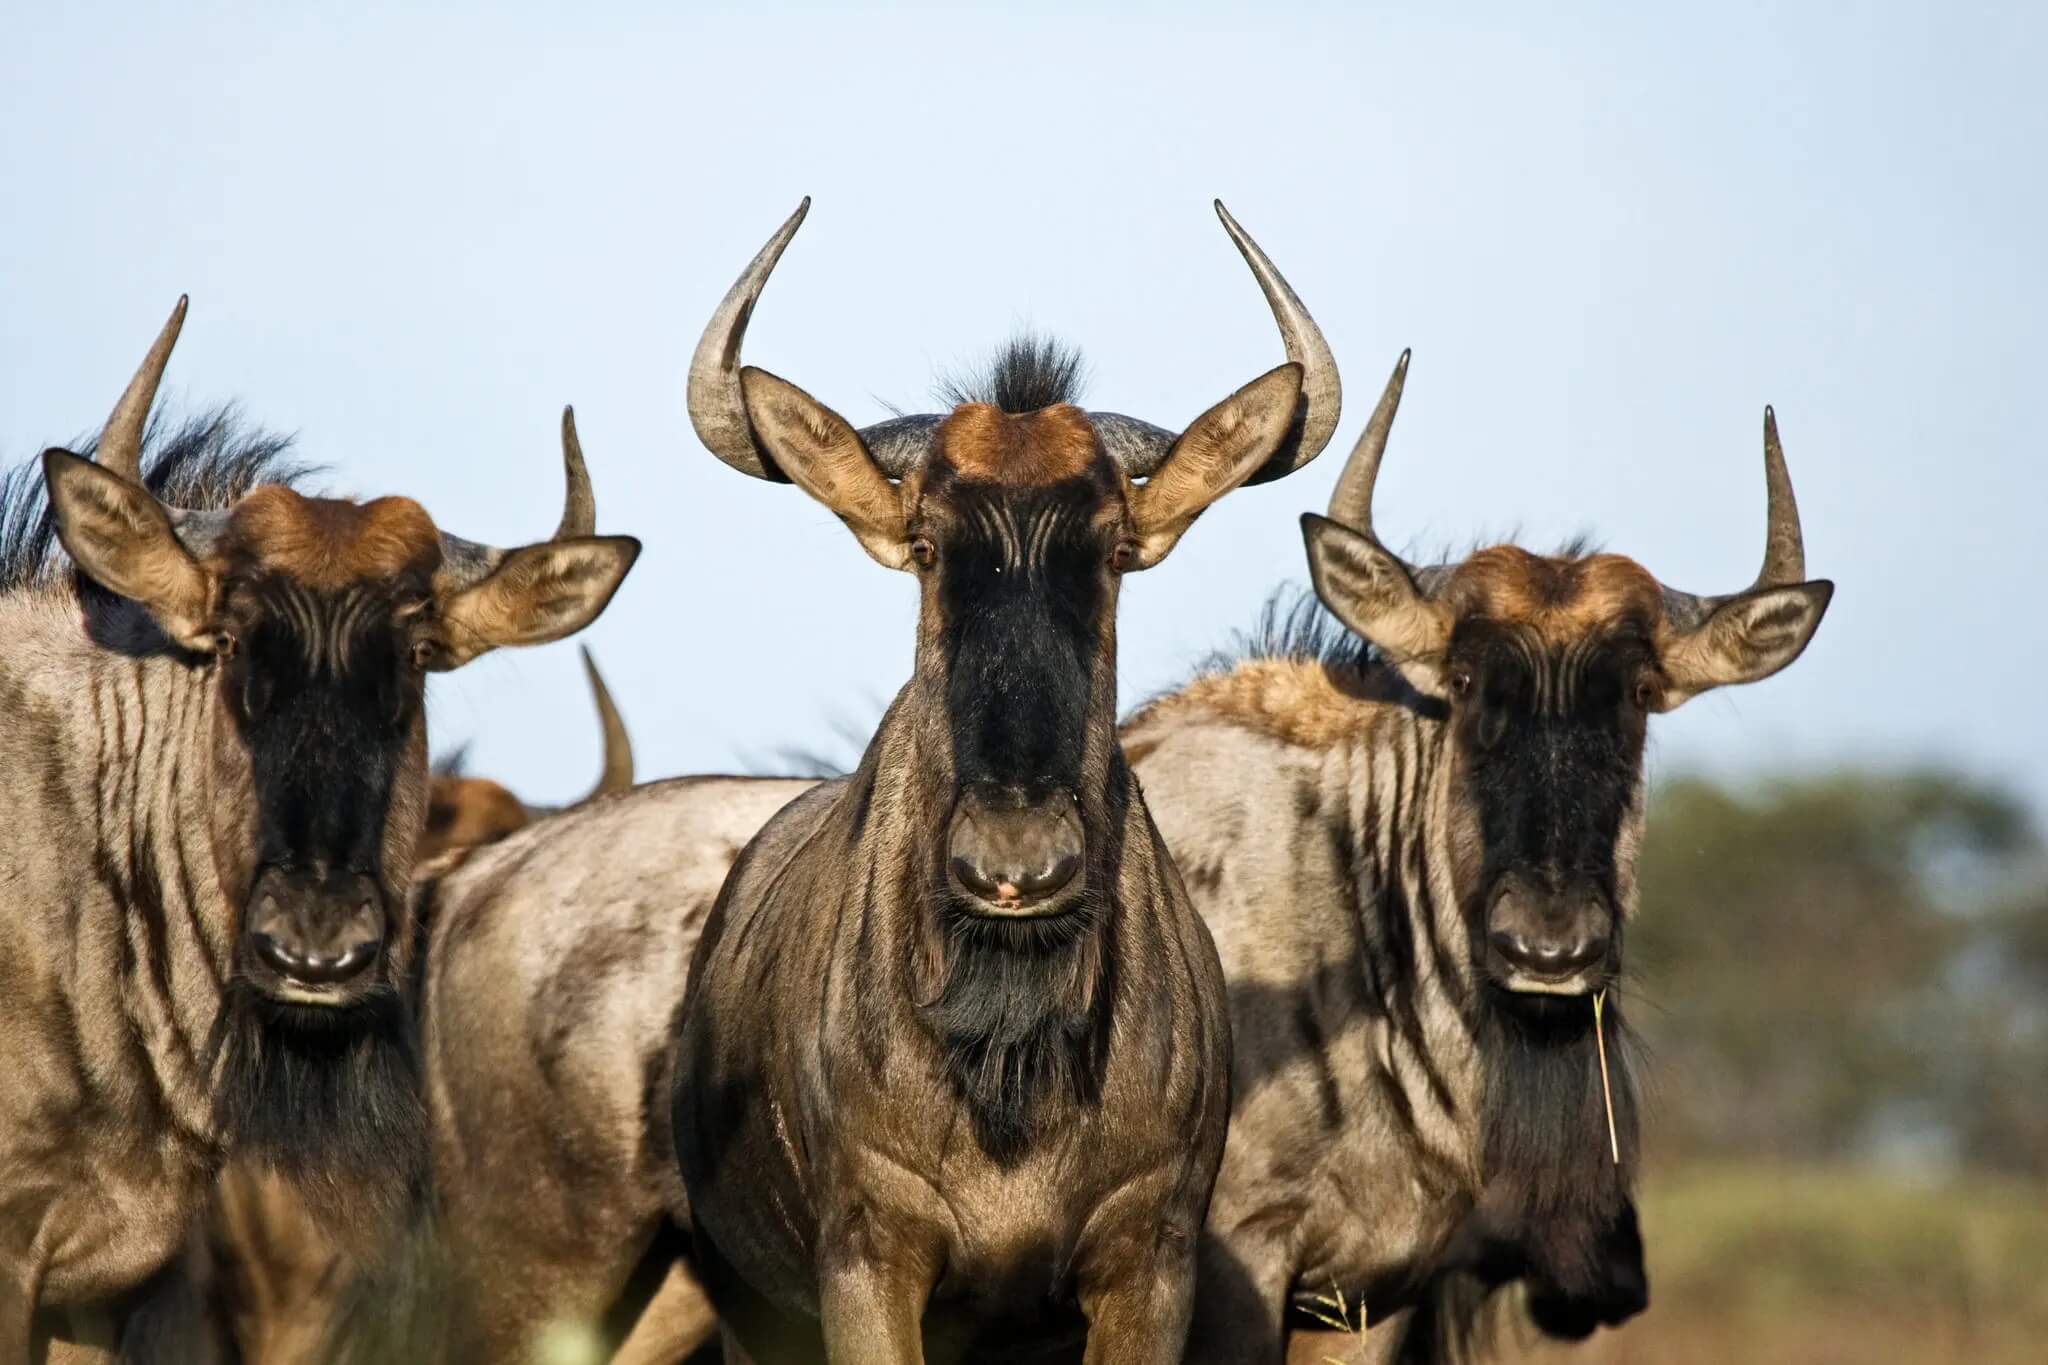 Next up on the lab-grown meat menu? Wild animals like wildebeest, springbok  and impala - Genetic Literacy Project